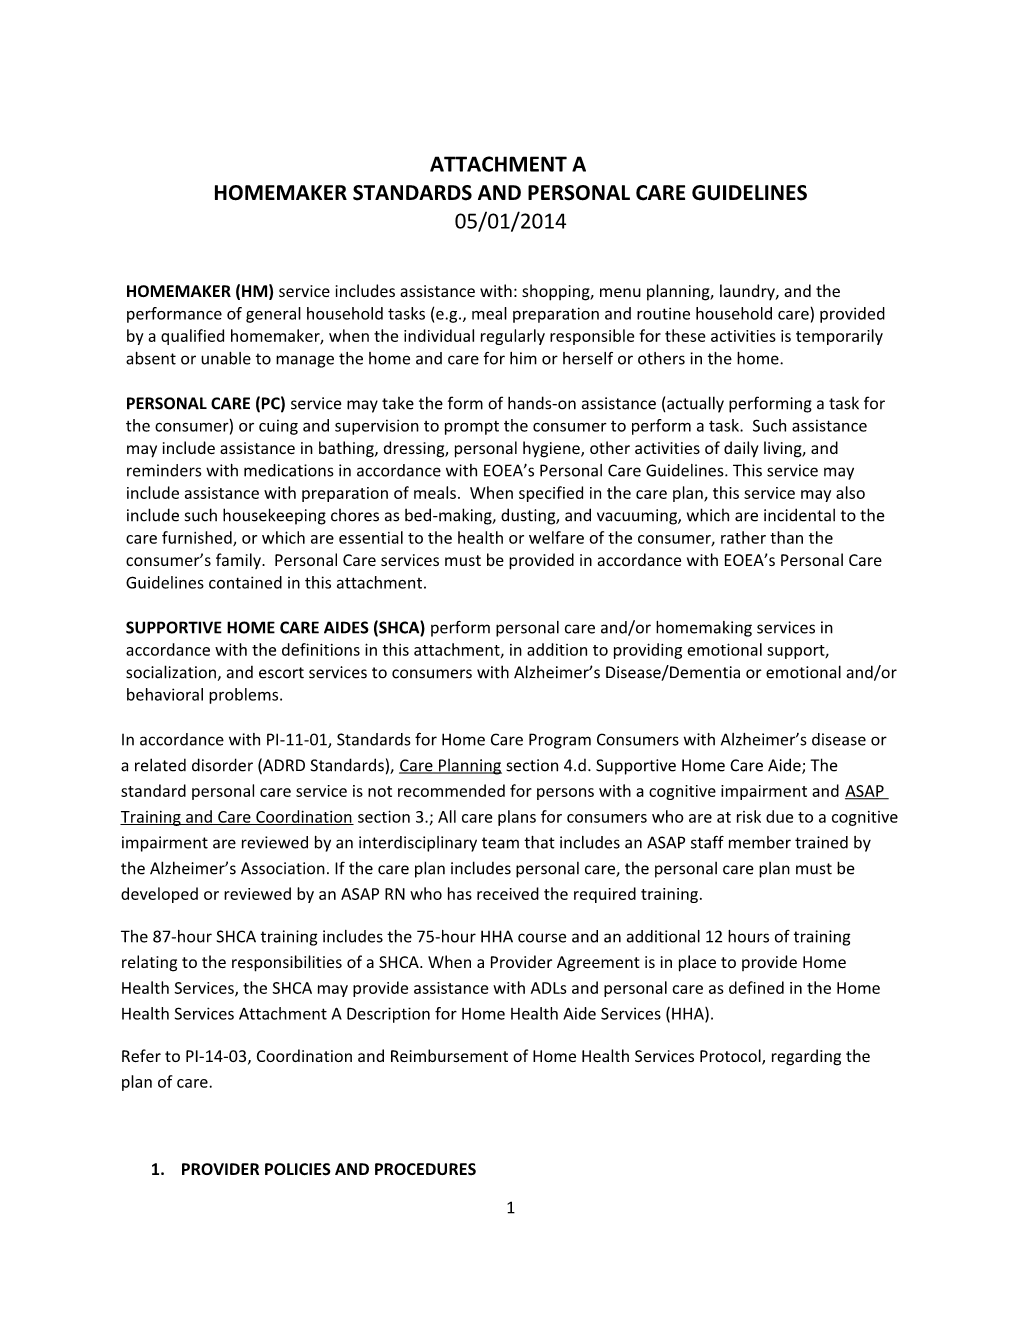 Homemaker Standards and Personal Care Guidelines